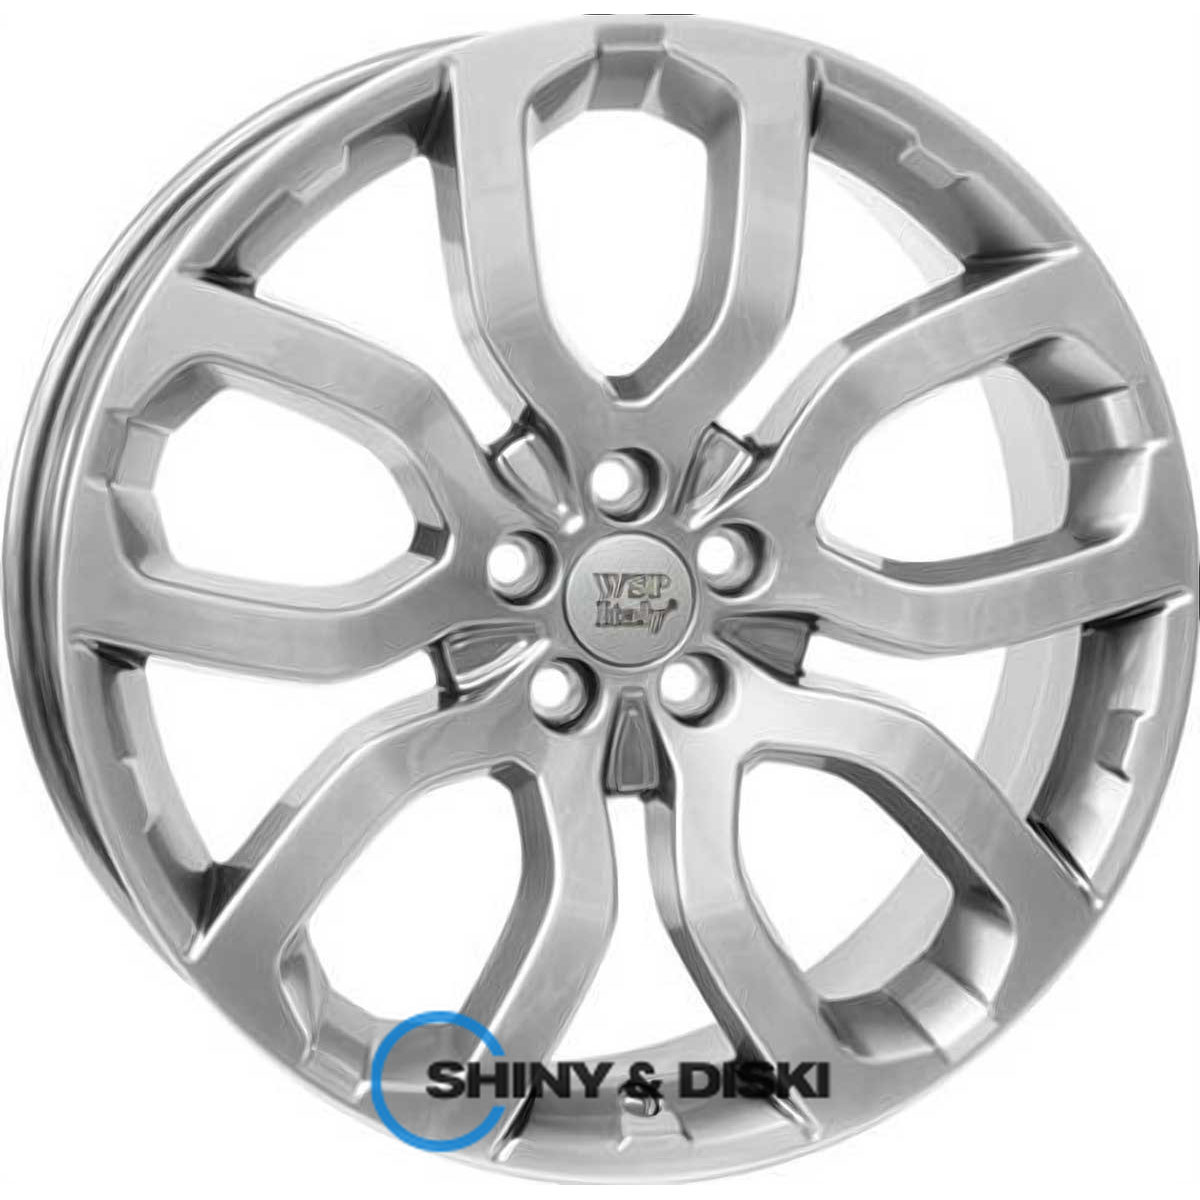 wsp italy land rover (w2357) liverpool s r18 w8 pcd5x108 et45 dia63.4